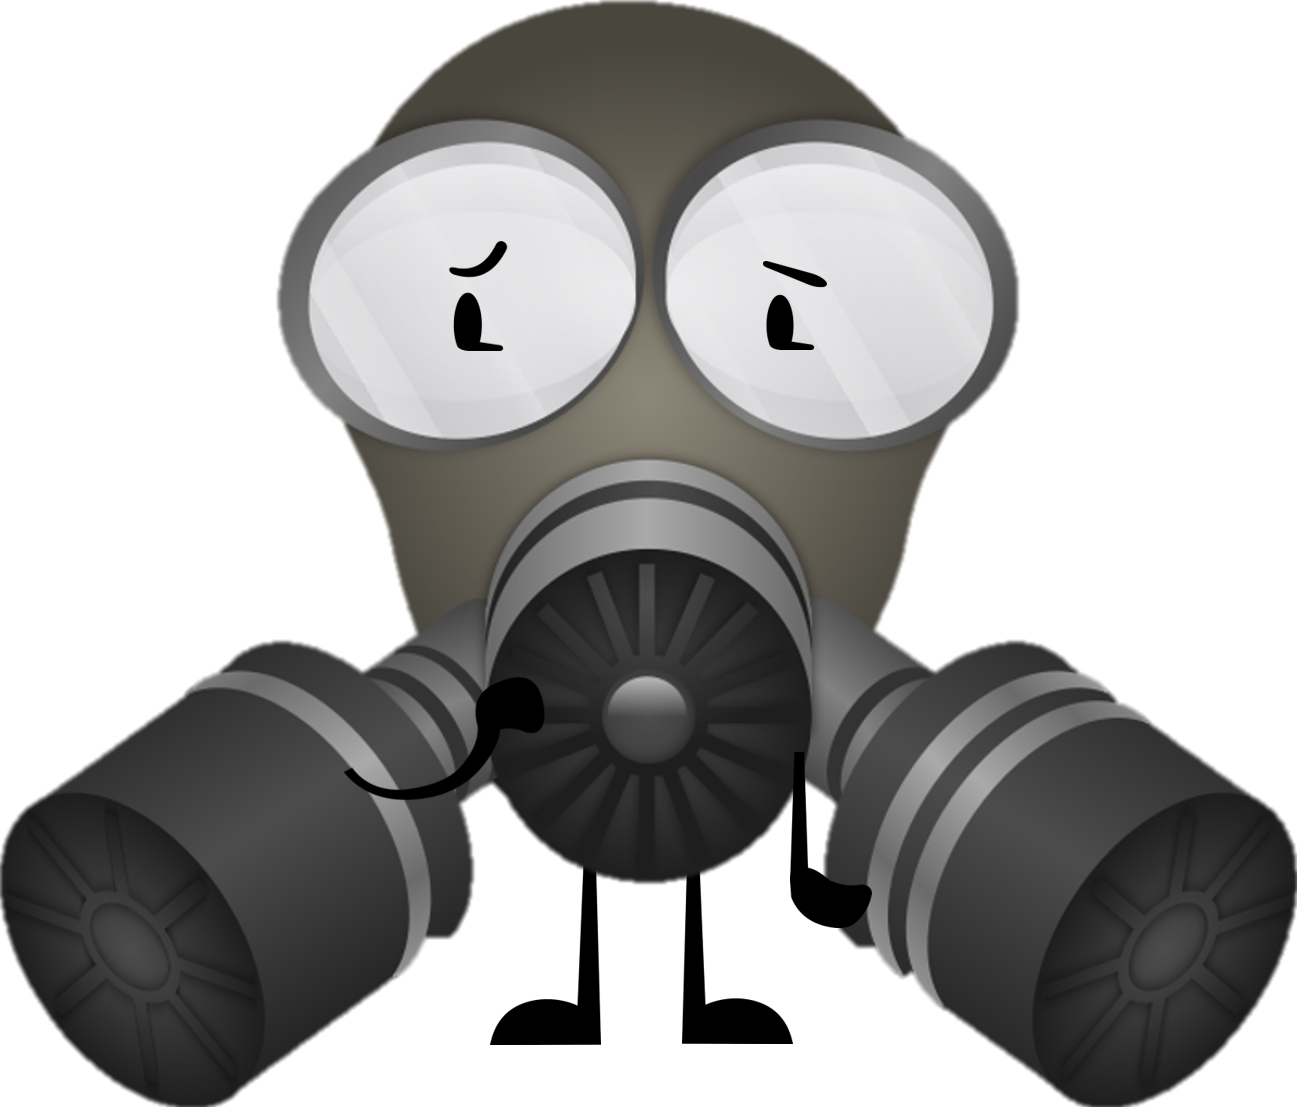 Updated Gas Mask Pose - Gas Mask Shower Curtain (1297x1107)